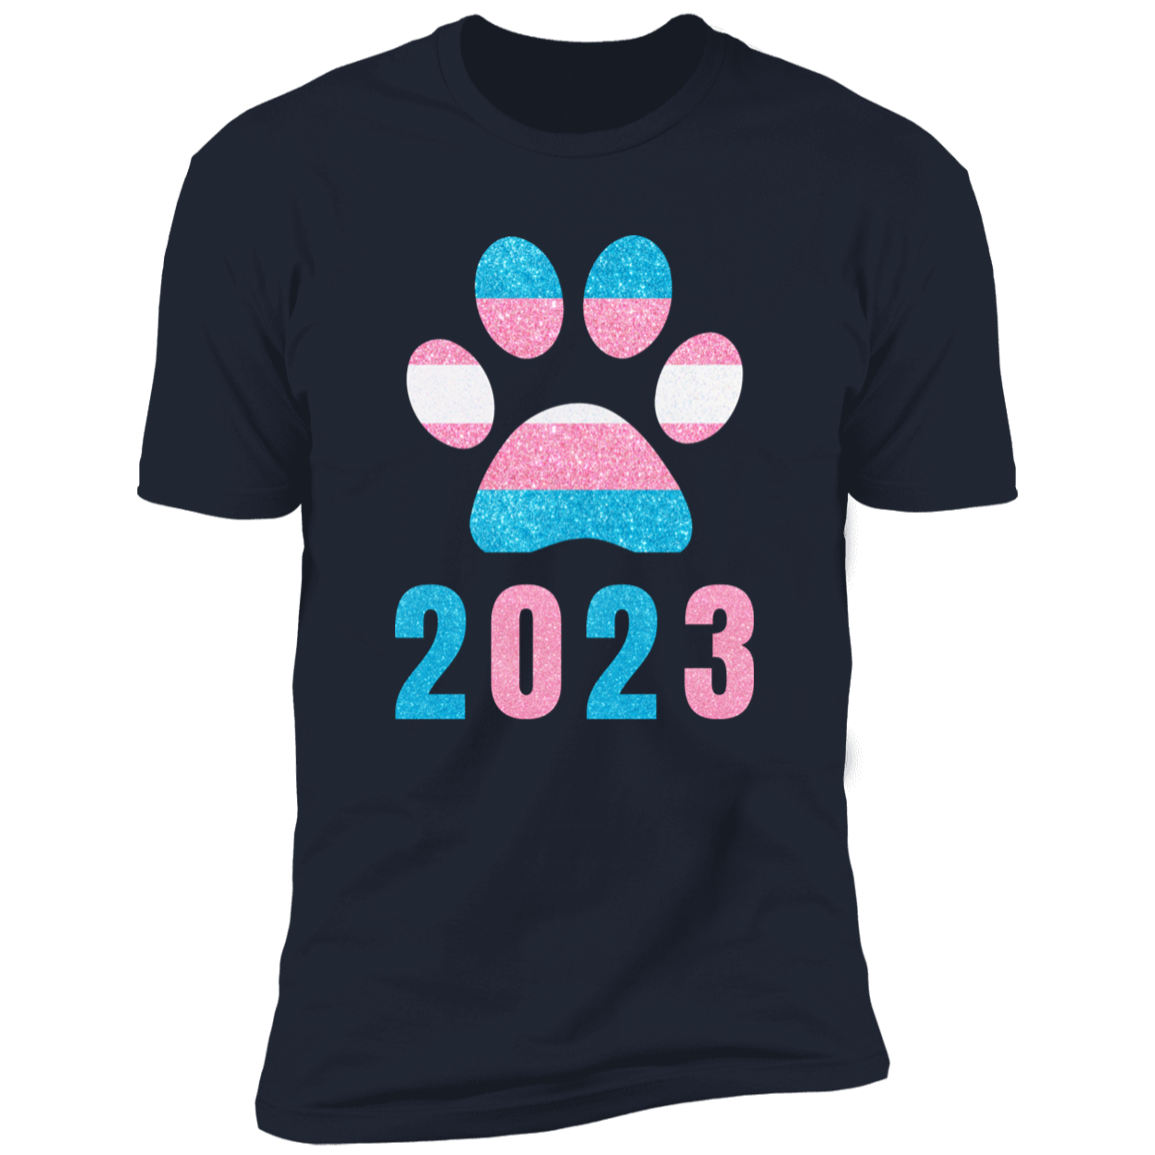 Dog Paw Trans Pride 2023 t-shirt, dog trans pride dog shirt for humans, in navy blue